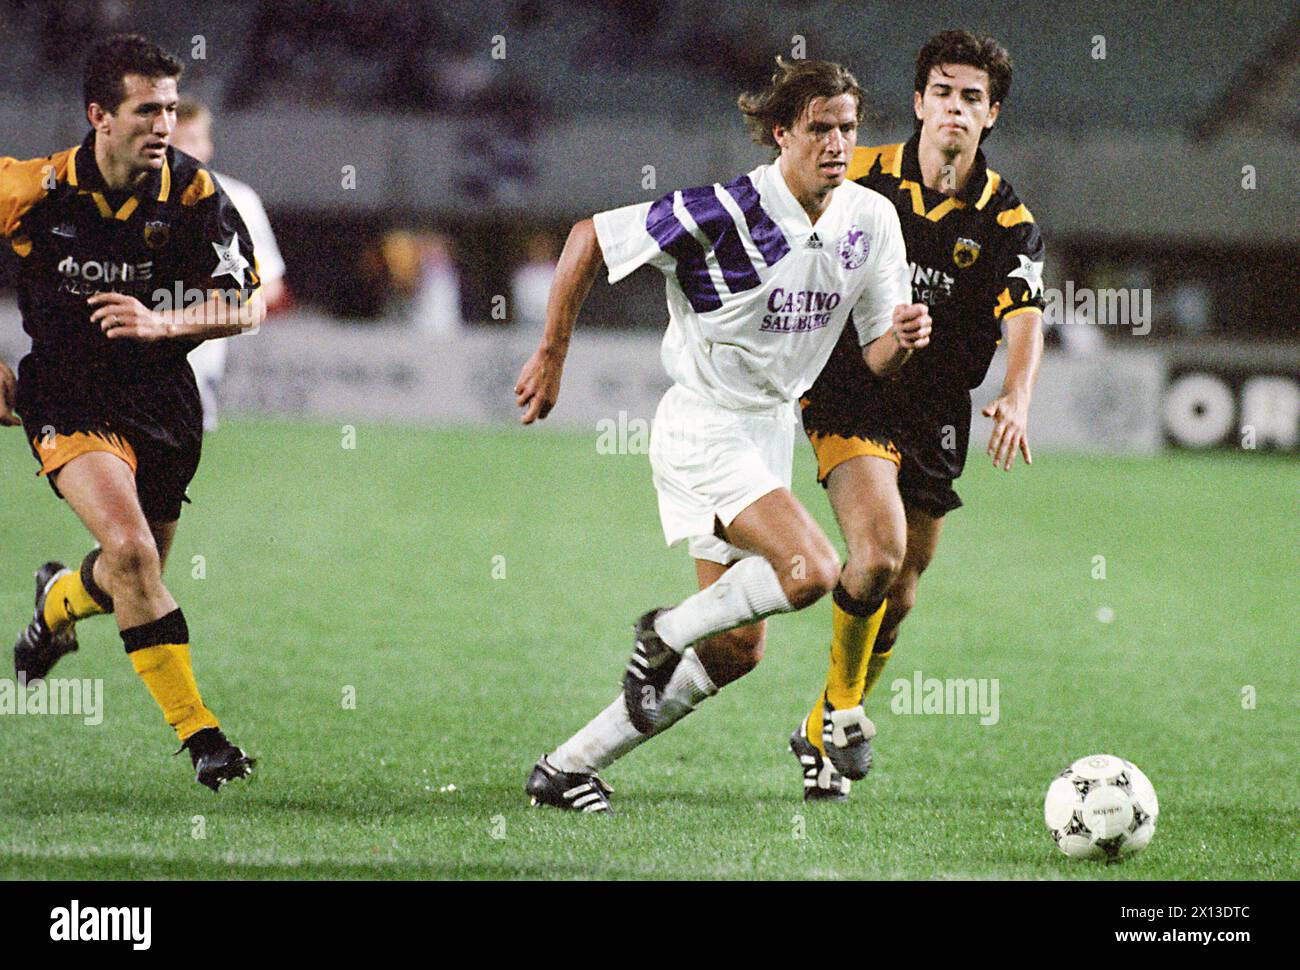 Vienna on September 14th 1994: Match between SV Salzburg and AEK Athens in the context of the Football Champions League in Vienna Ernst Happel Stadium (0:0). In the picture: Wolfgang Feiersinger (c., Salzburg). - 19940914 PD0001 - Rechteinfo: Rights Managed (RM) Stock Photo